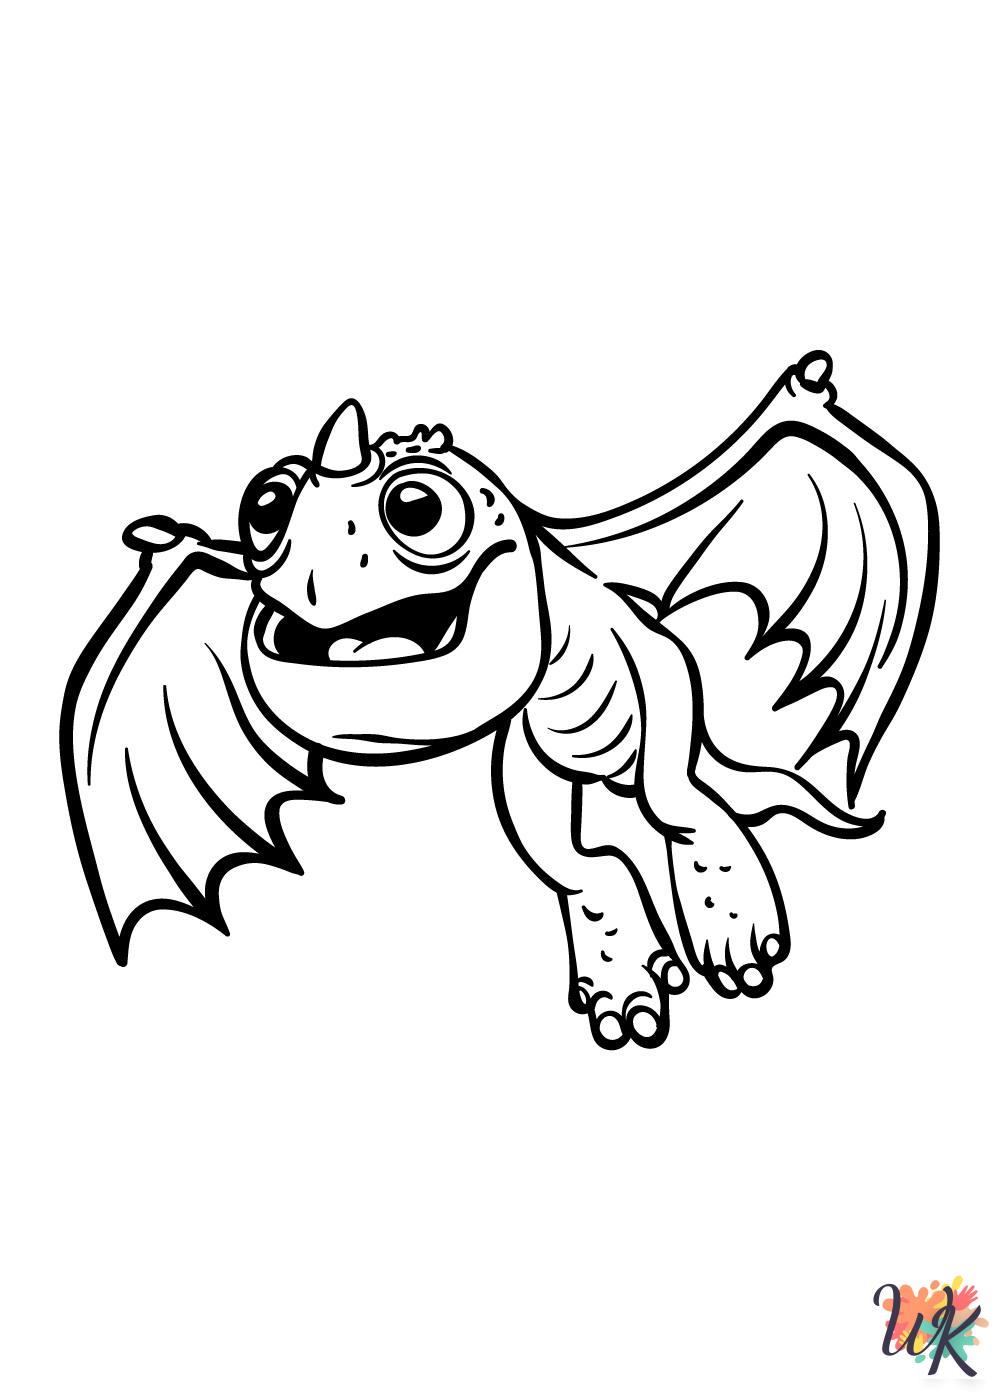 How To Train Your Dragon coloring book pages